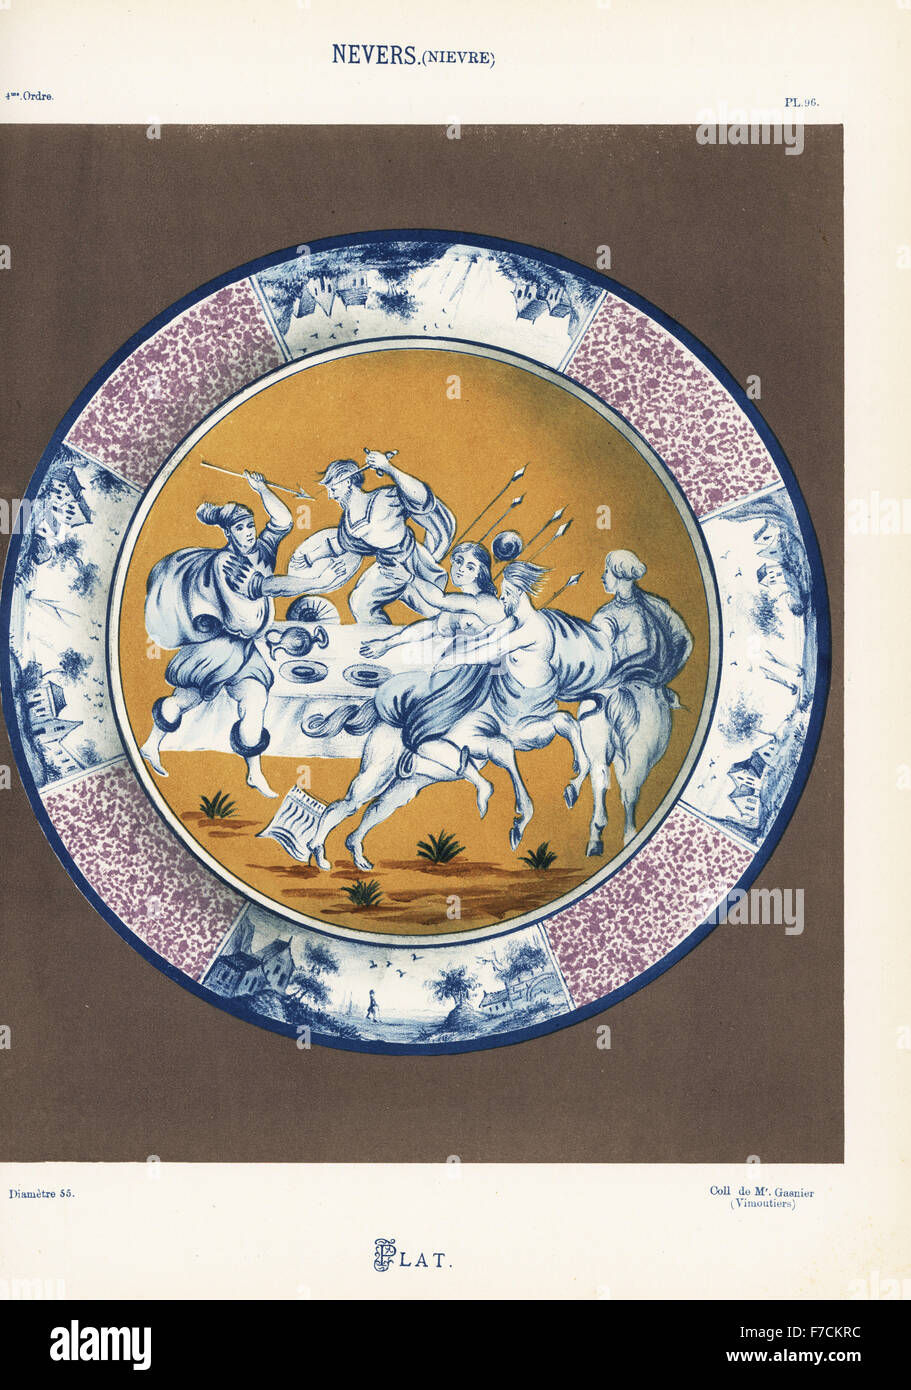 Plate from Nevers, France, decorated with a mythological scene of centaurs kidnapping a woman from a banquet. Hand-finished chromolithograph from Ris Paquot's General History of Ancient French and Foreign Glazed Pottery, Chez l'Auteur, Paris, 1874. Stock Photo